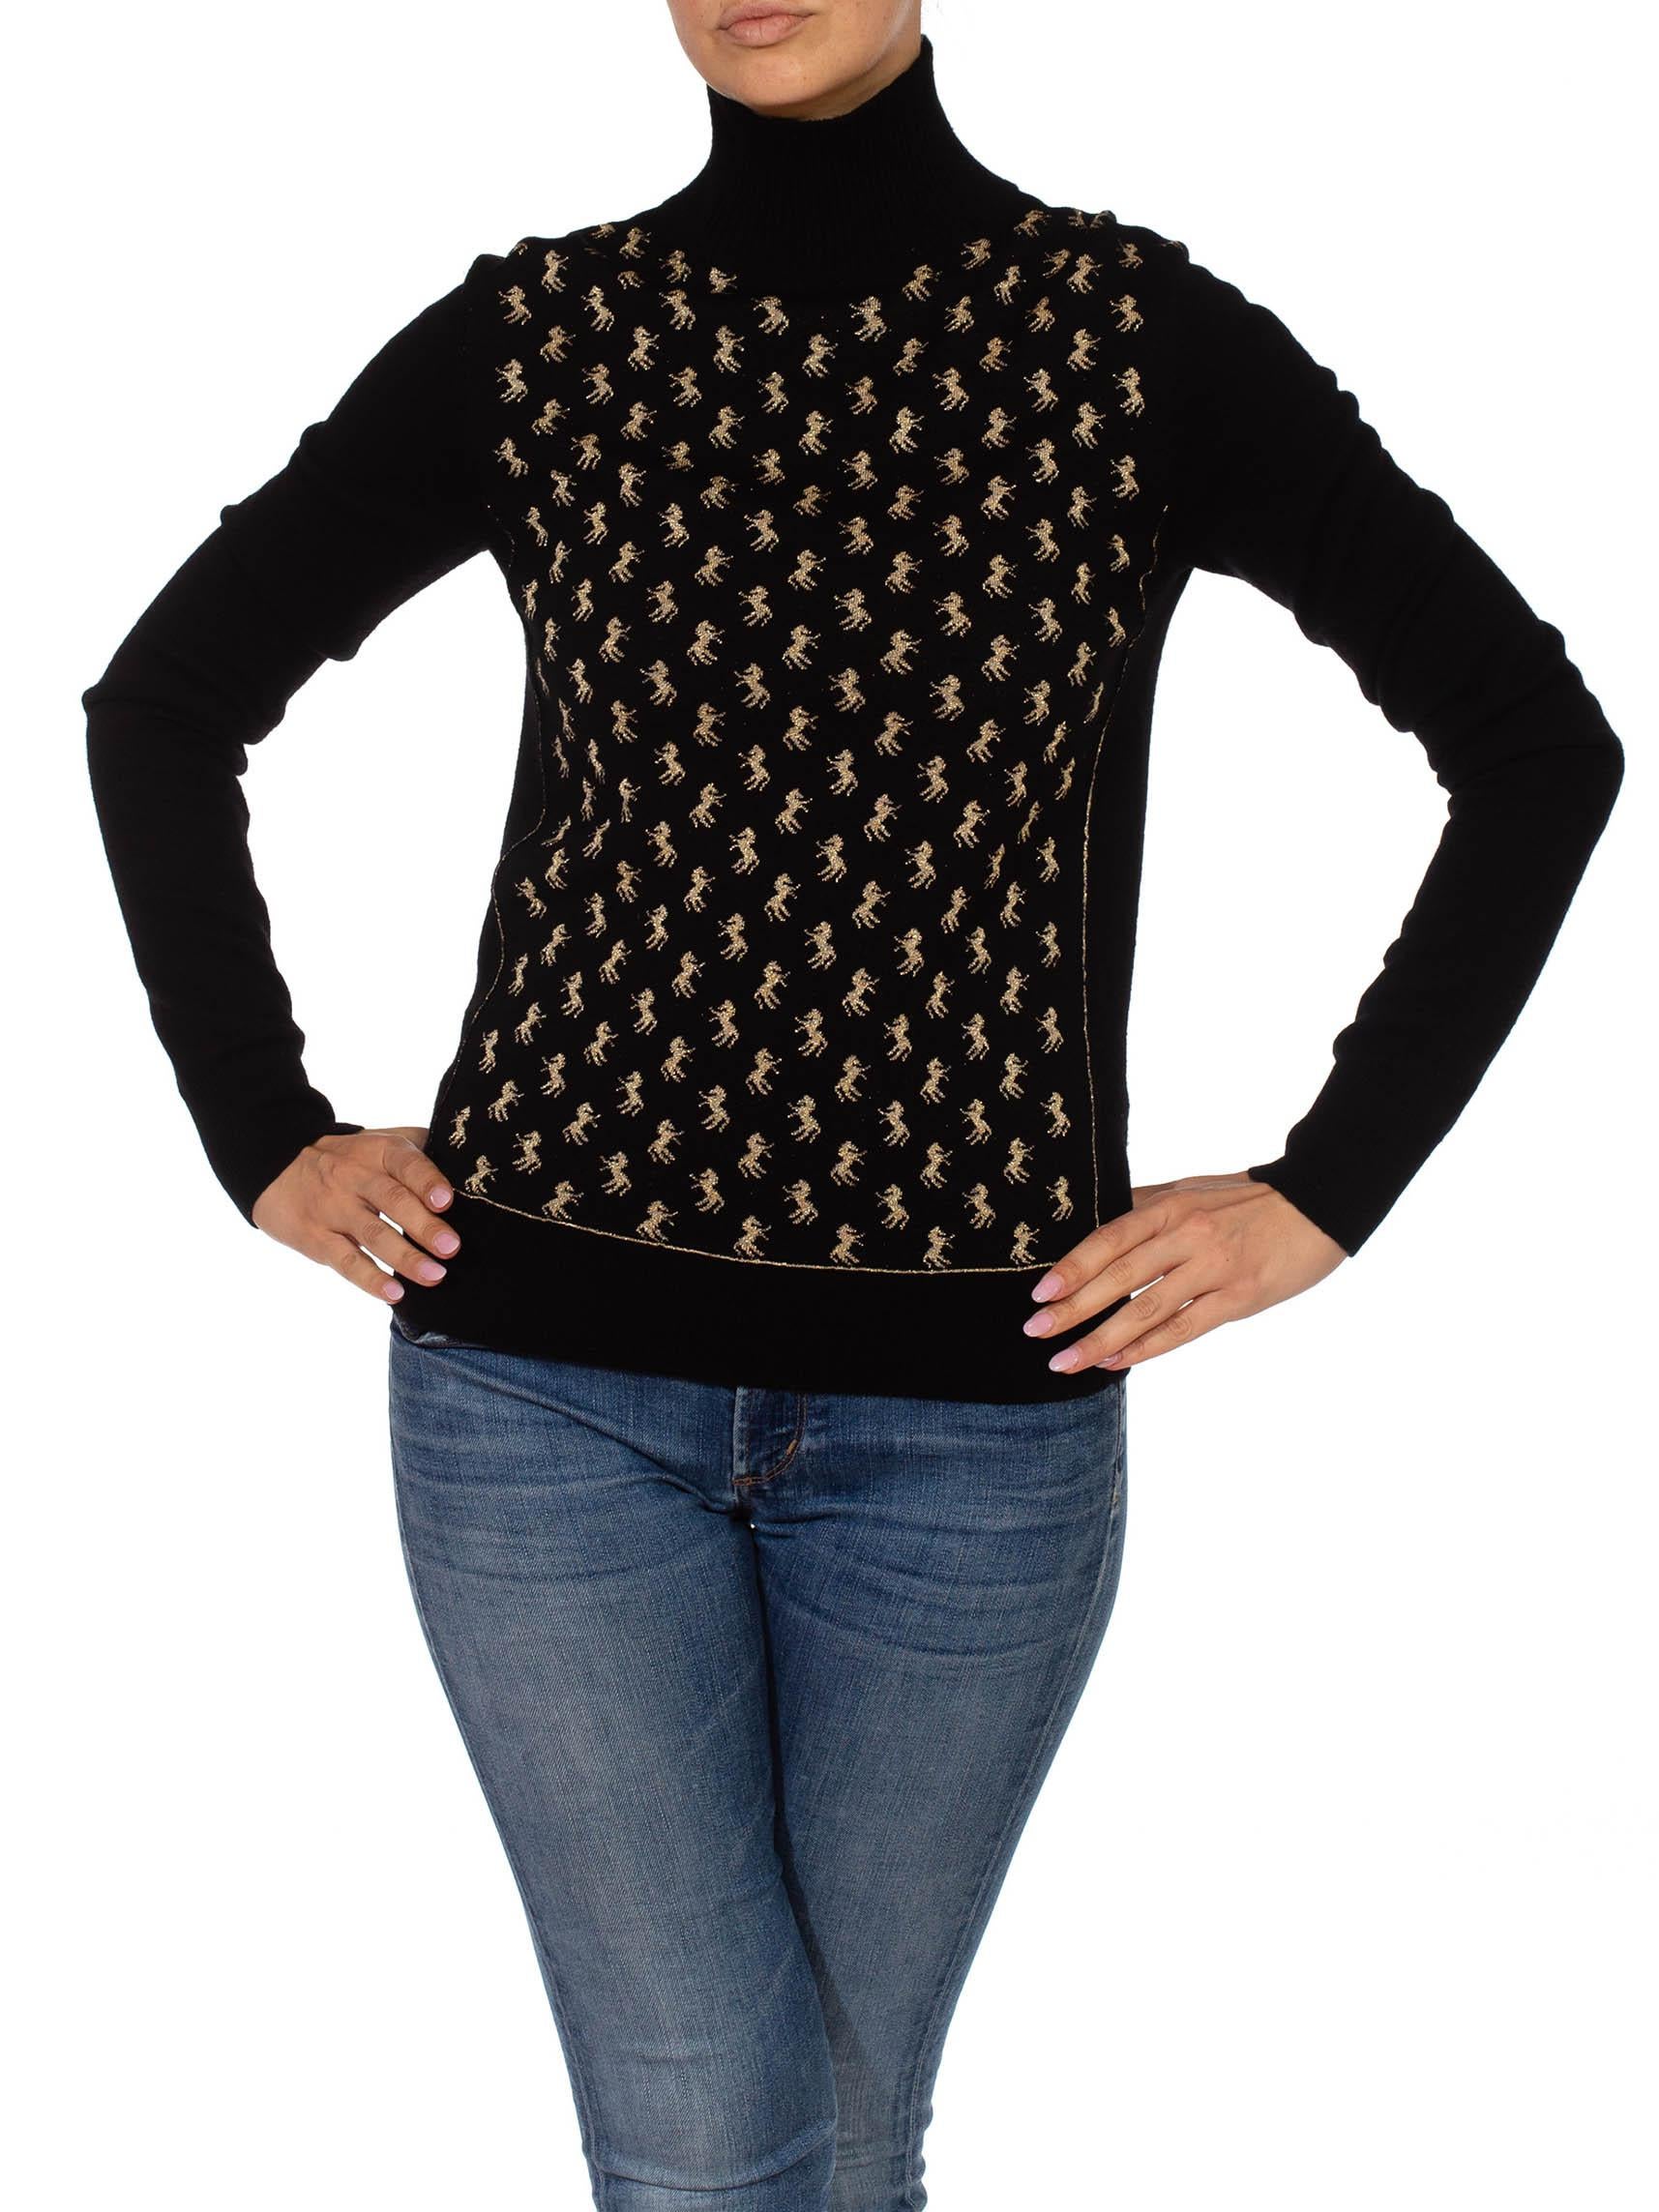 2000S CHLOE Black & Gold Wool/Lurex Knit Horse Jacquard Sweater In Excellent Condition In New York, NY